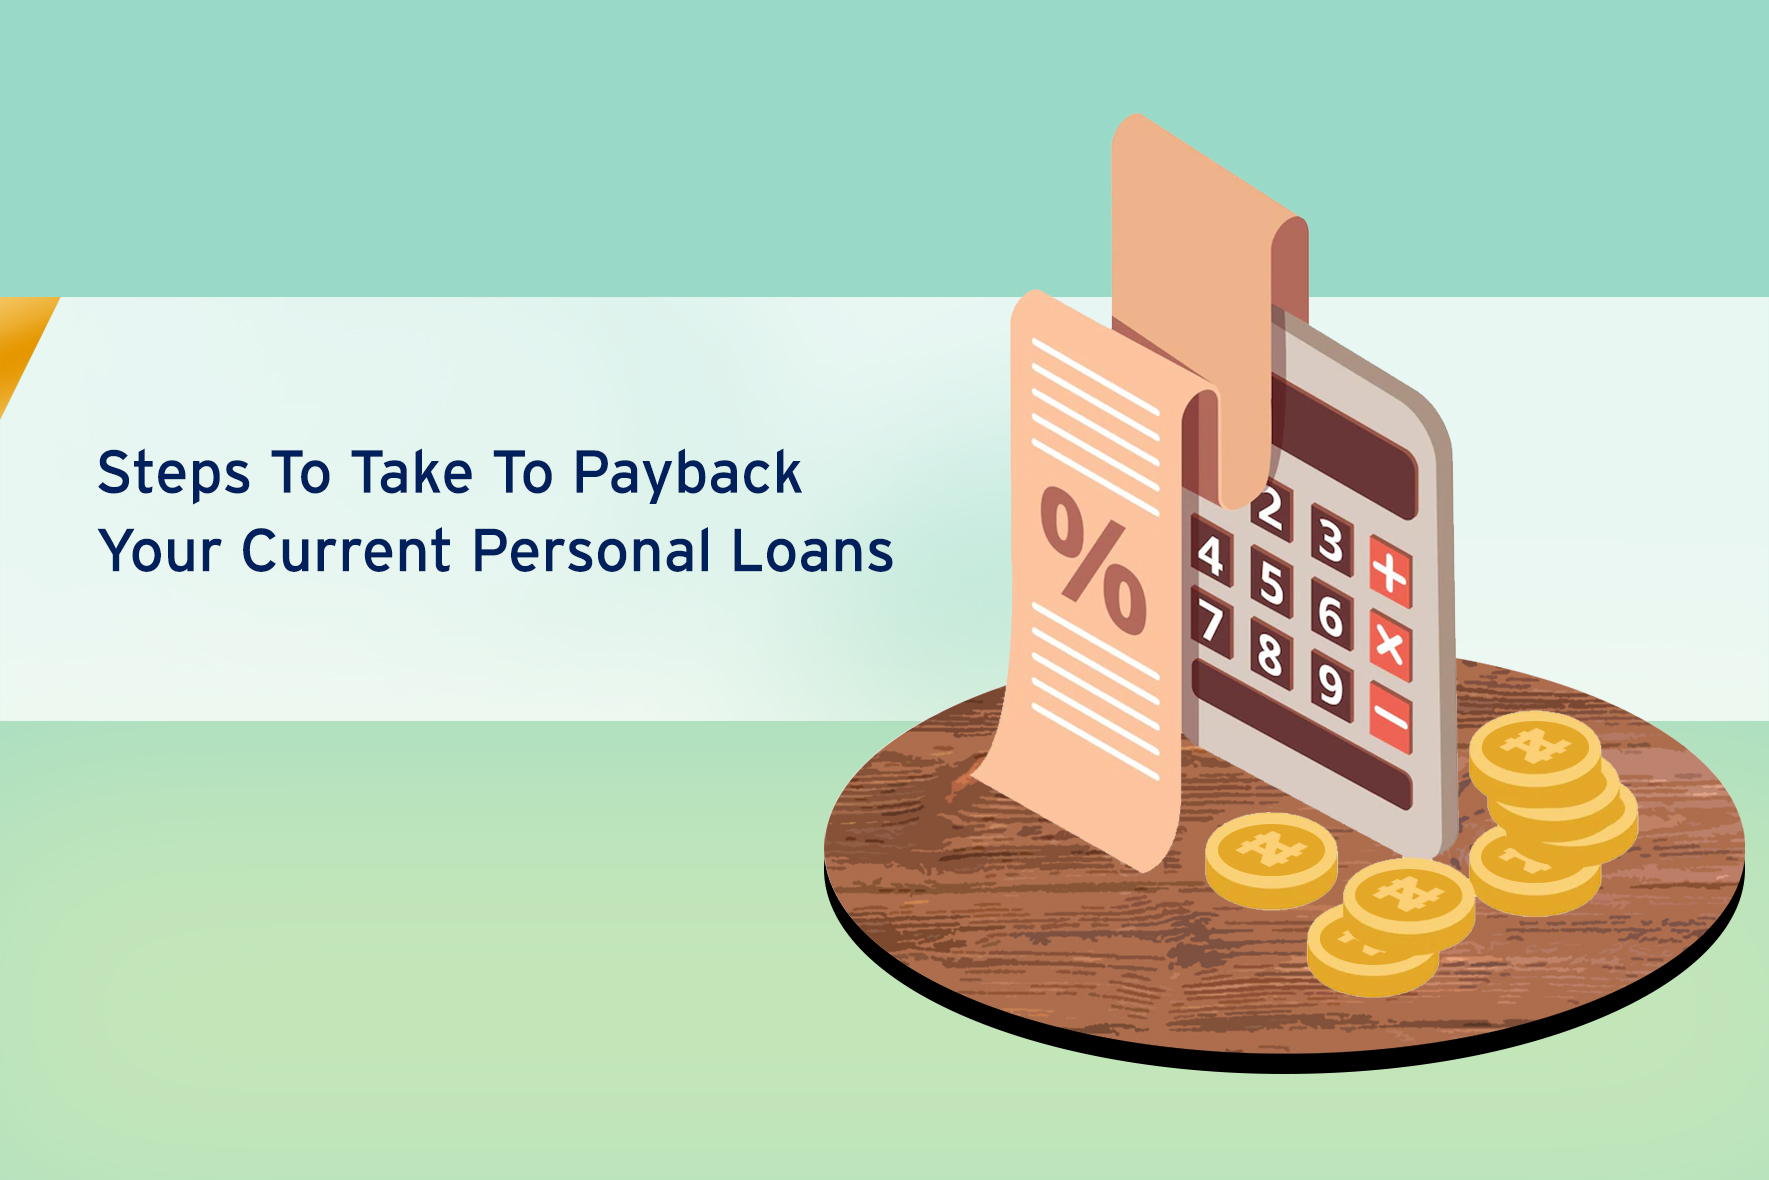 Steps-To-Take-To-Payback-Your-Current-Personal-Loans-